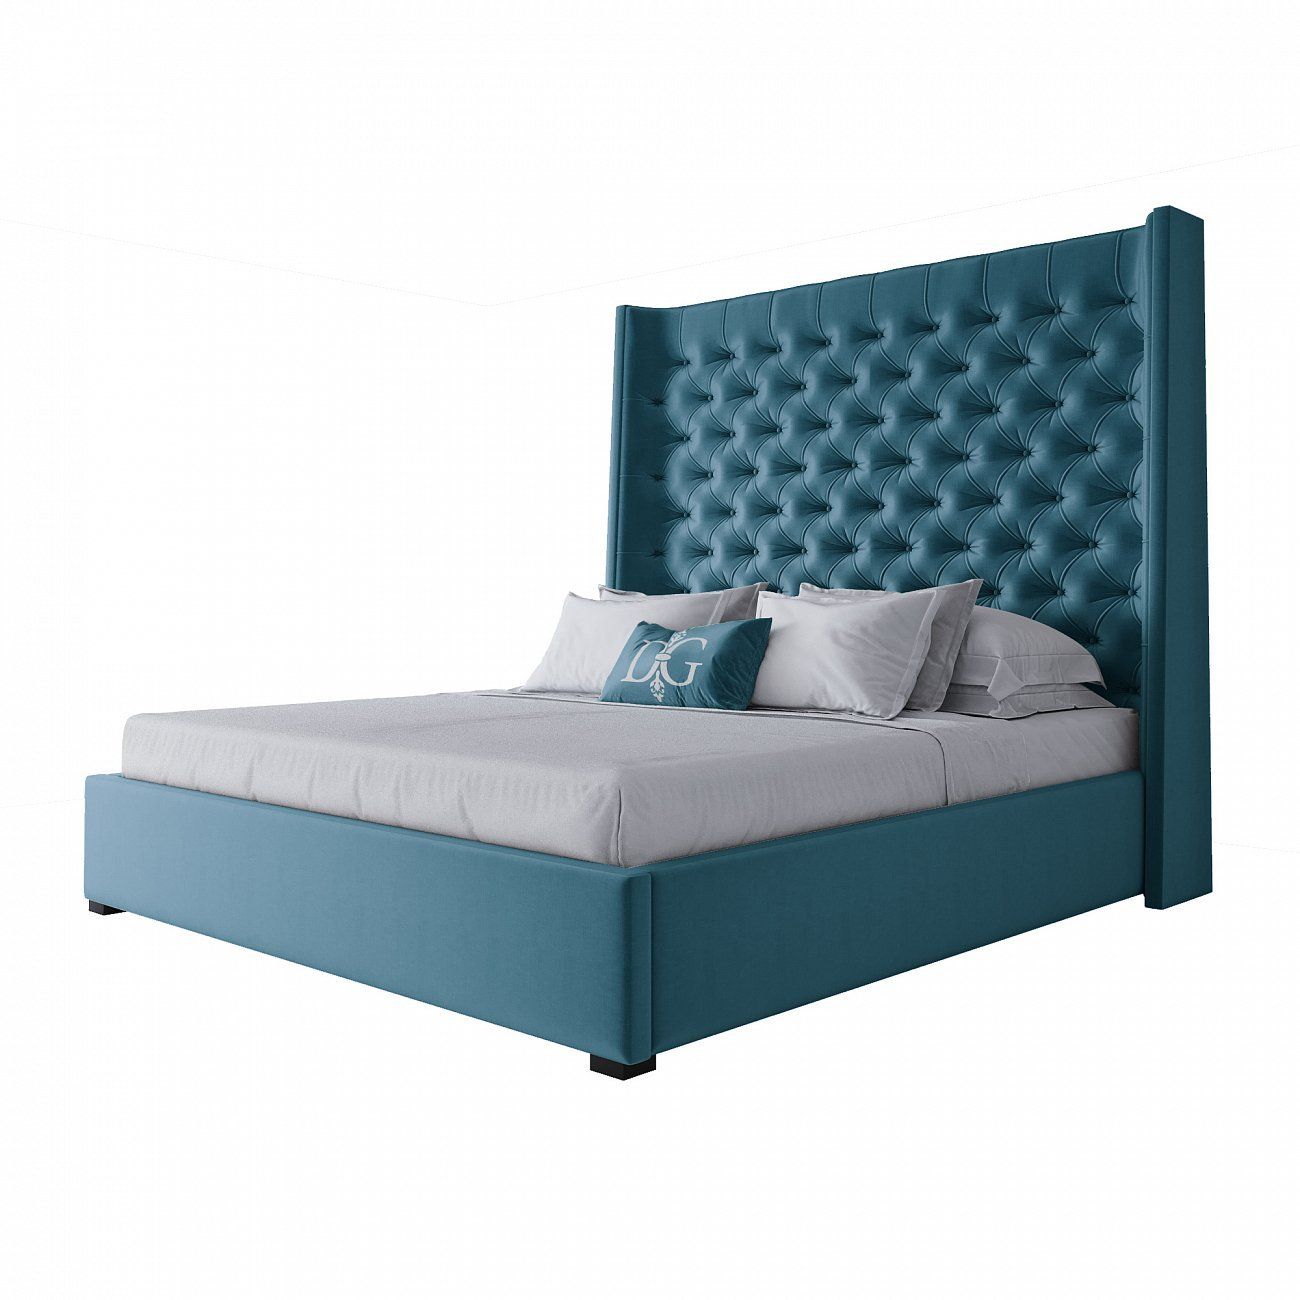 Double bed 180x200 turquoise velour Jackie King P